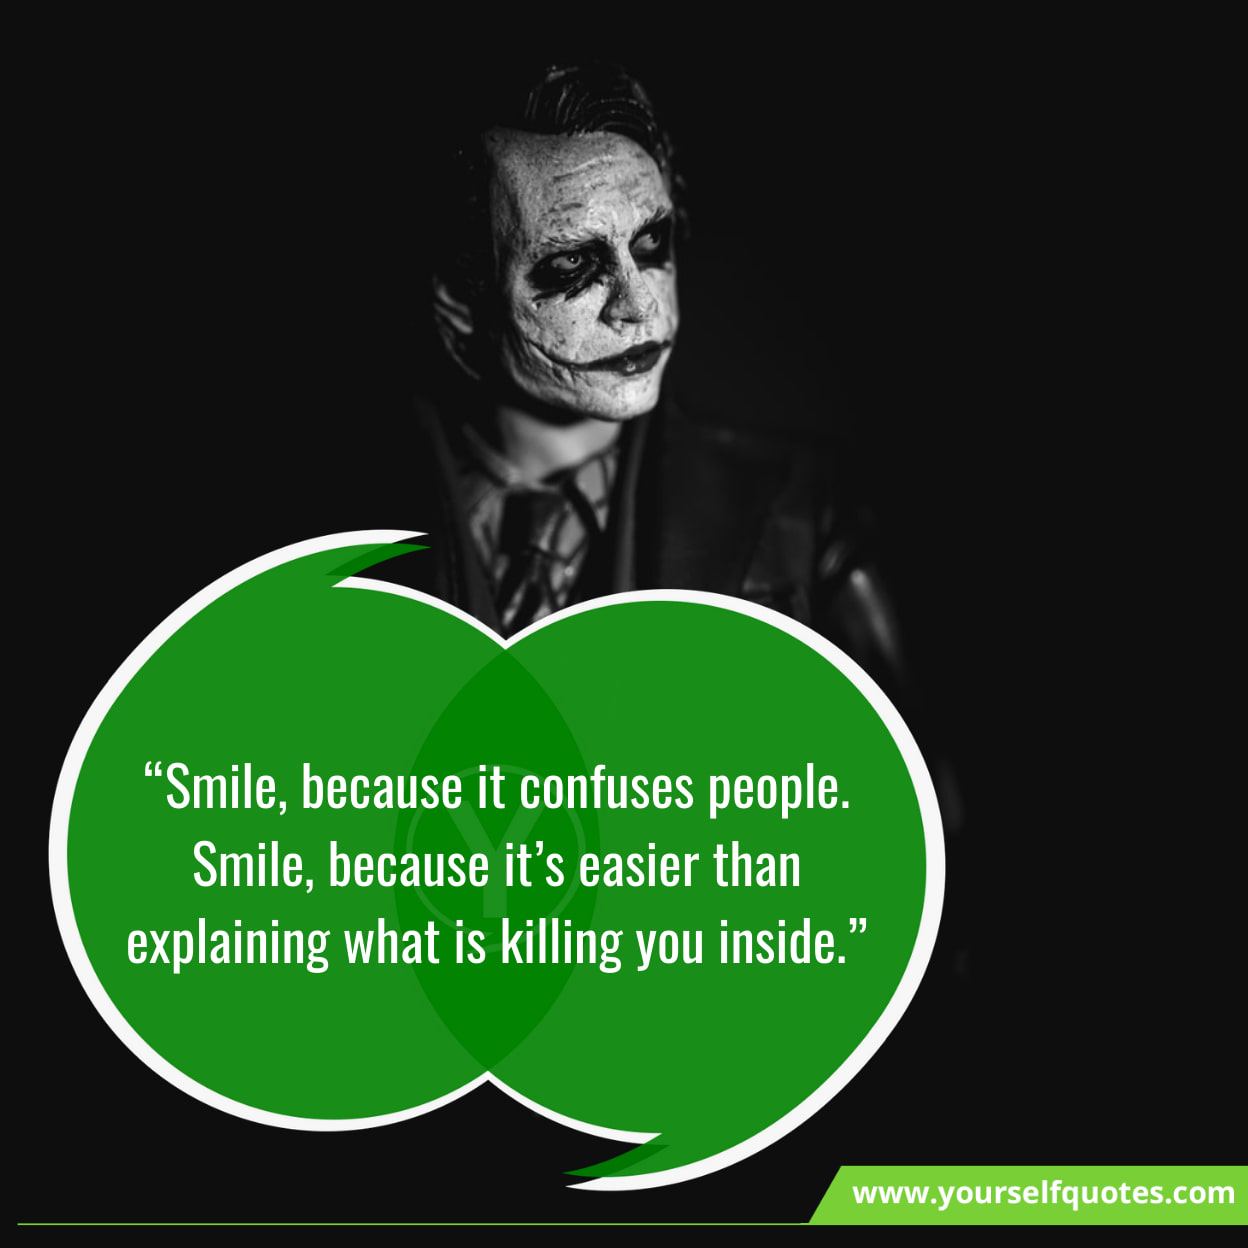 66 Joker Quotes On Humanity, Life That Really Make You Think